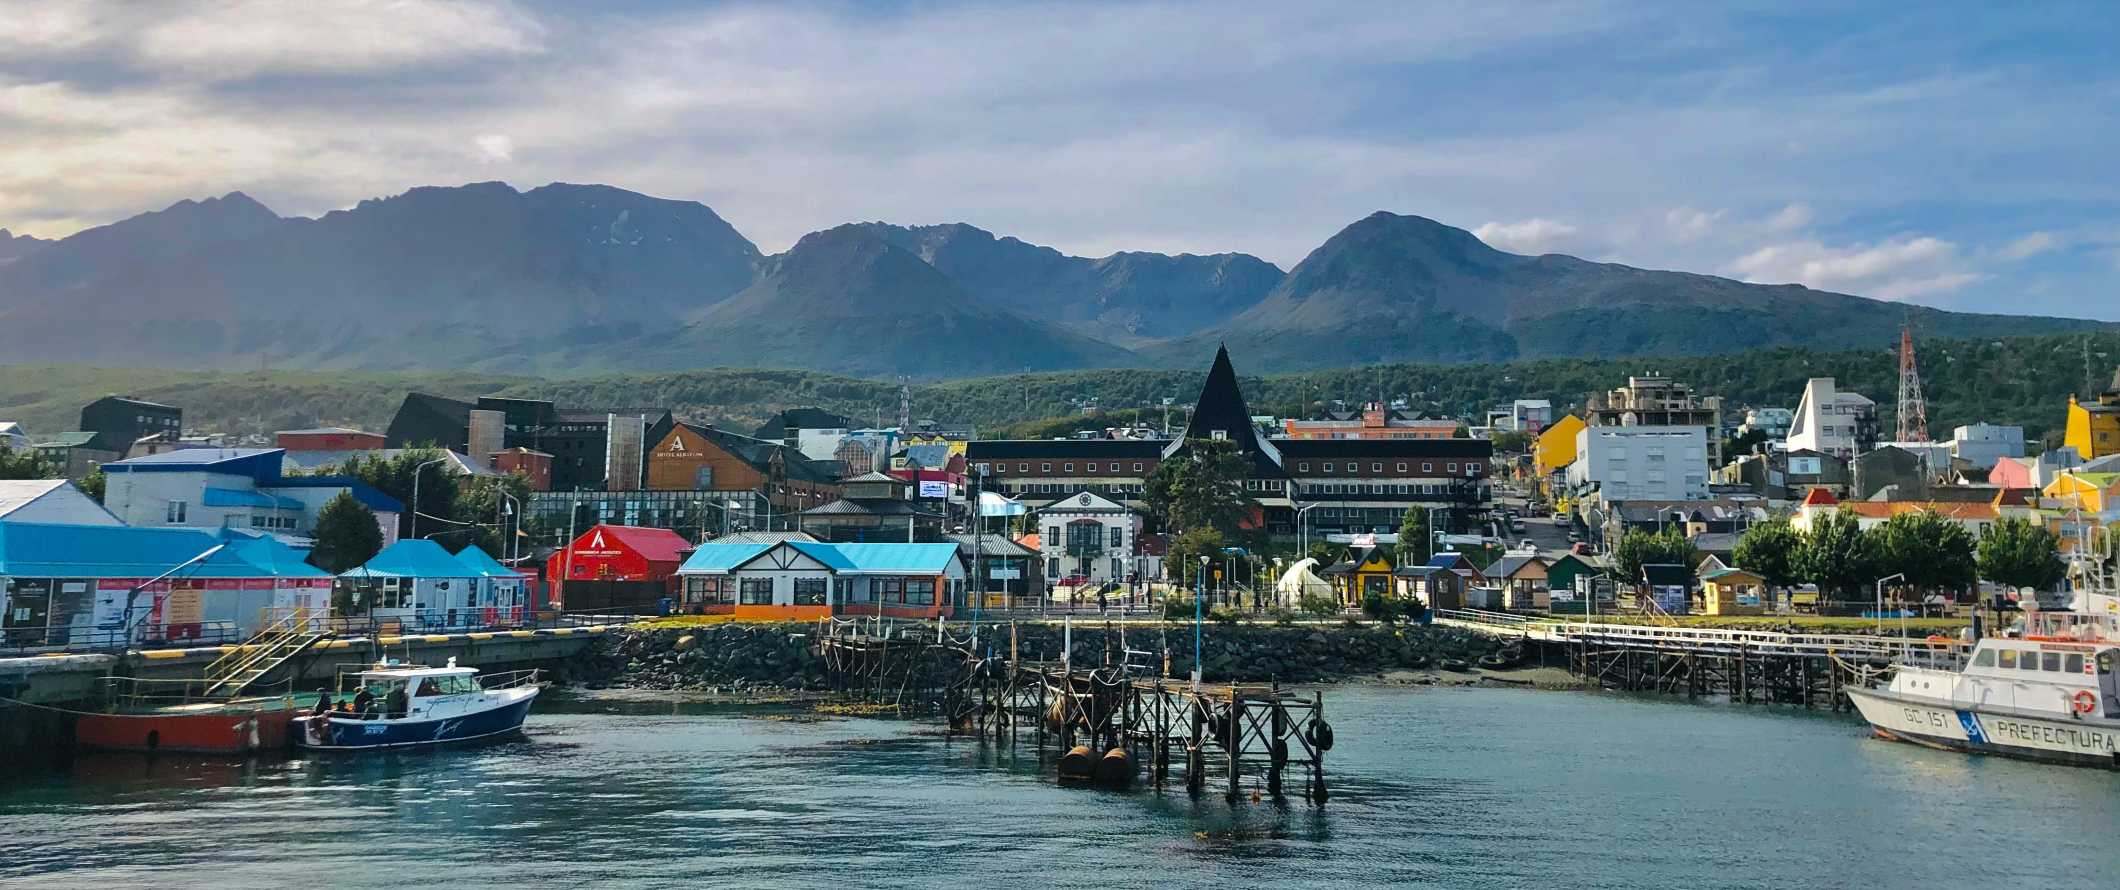 Colorful houses along a waterfront lined with docks in the village of Ushuaia, the southernmost city in Argentina